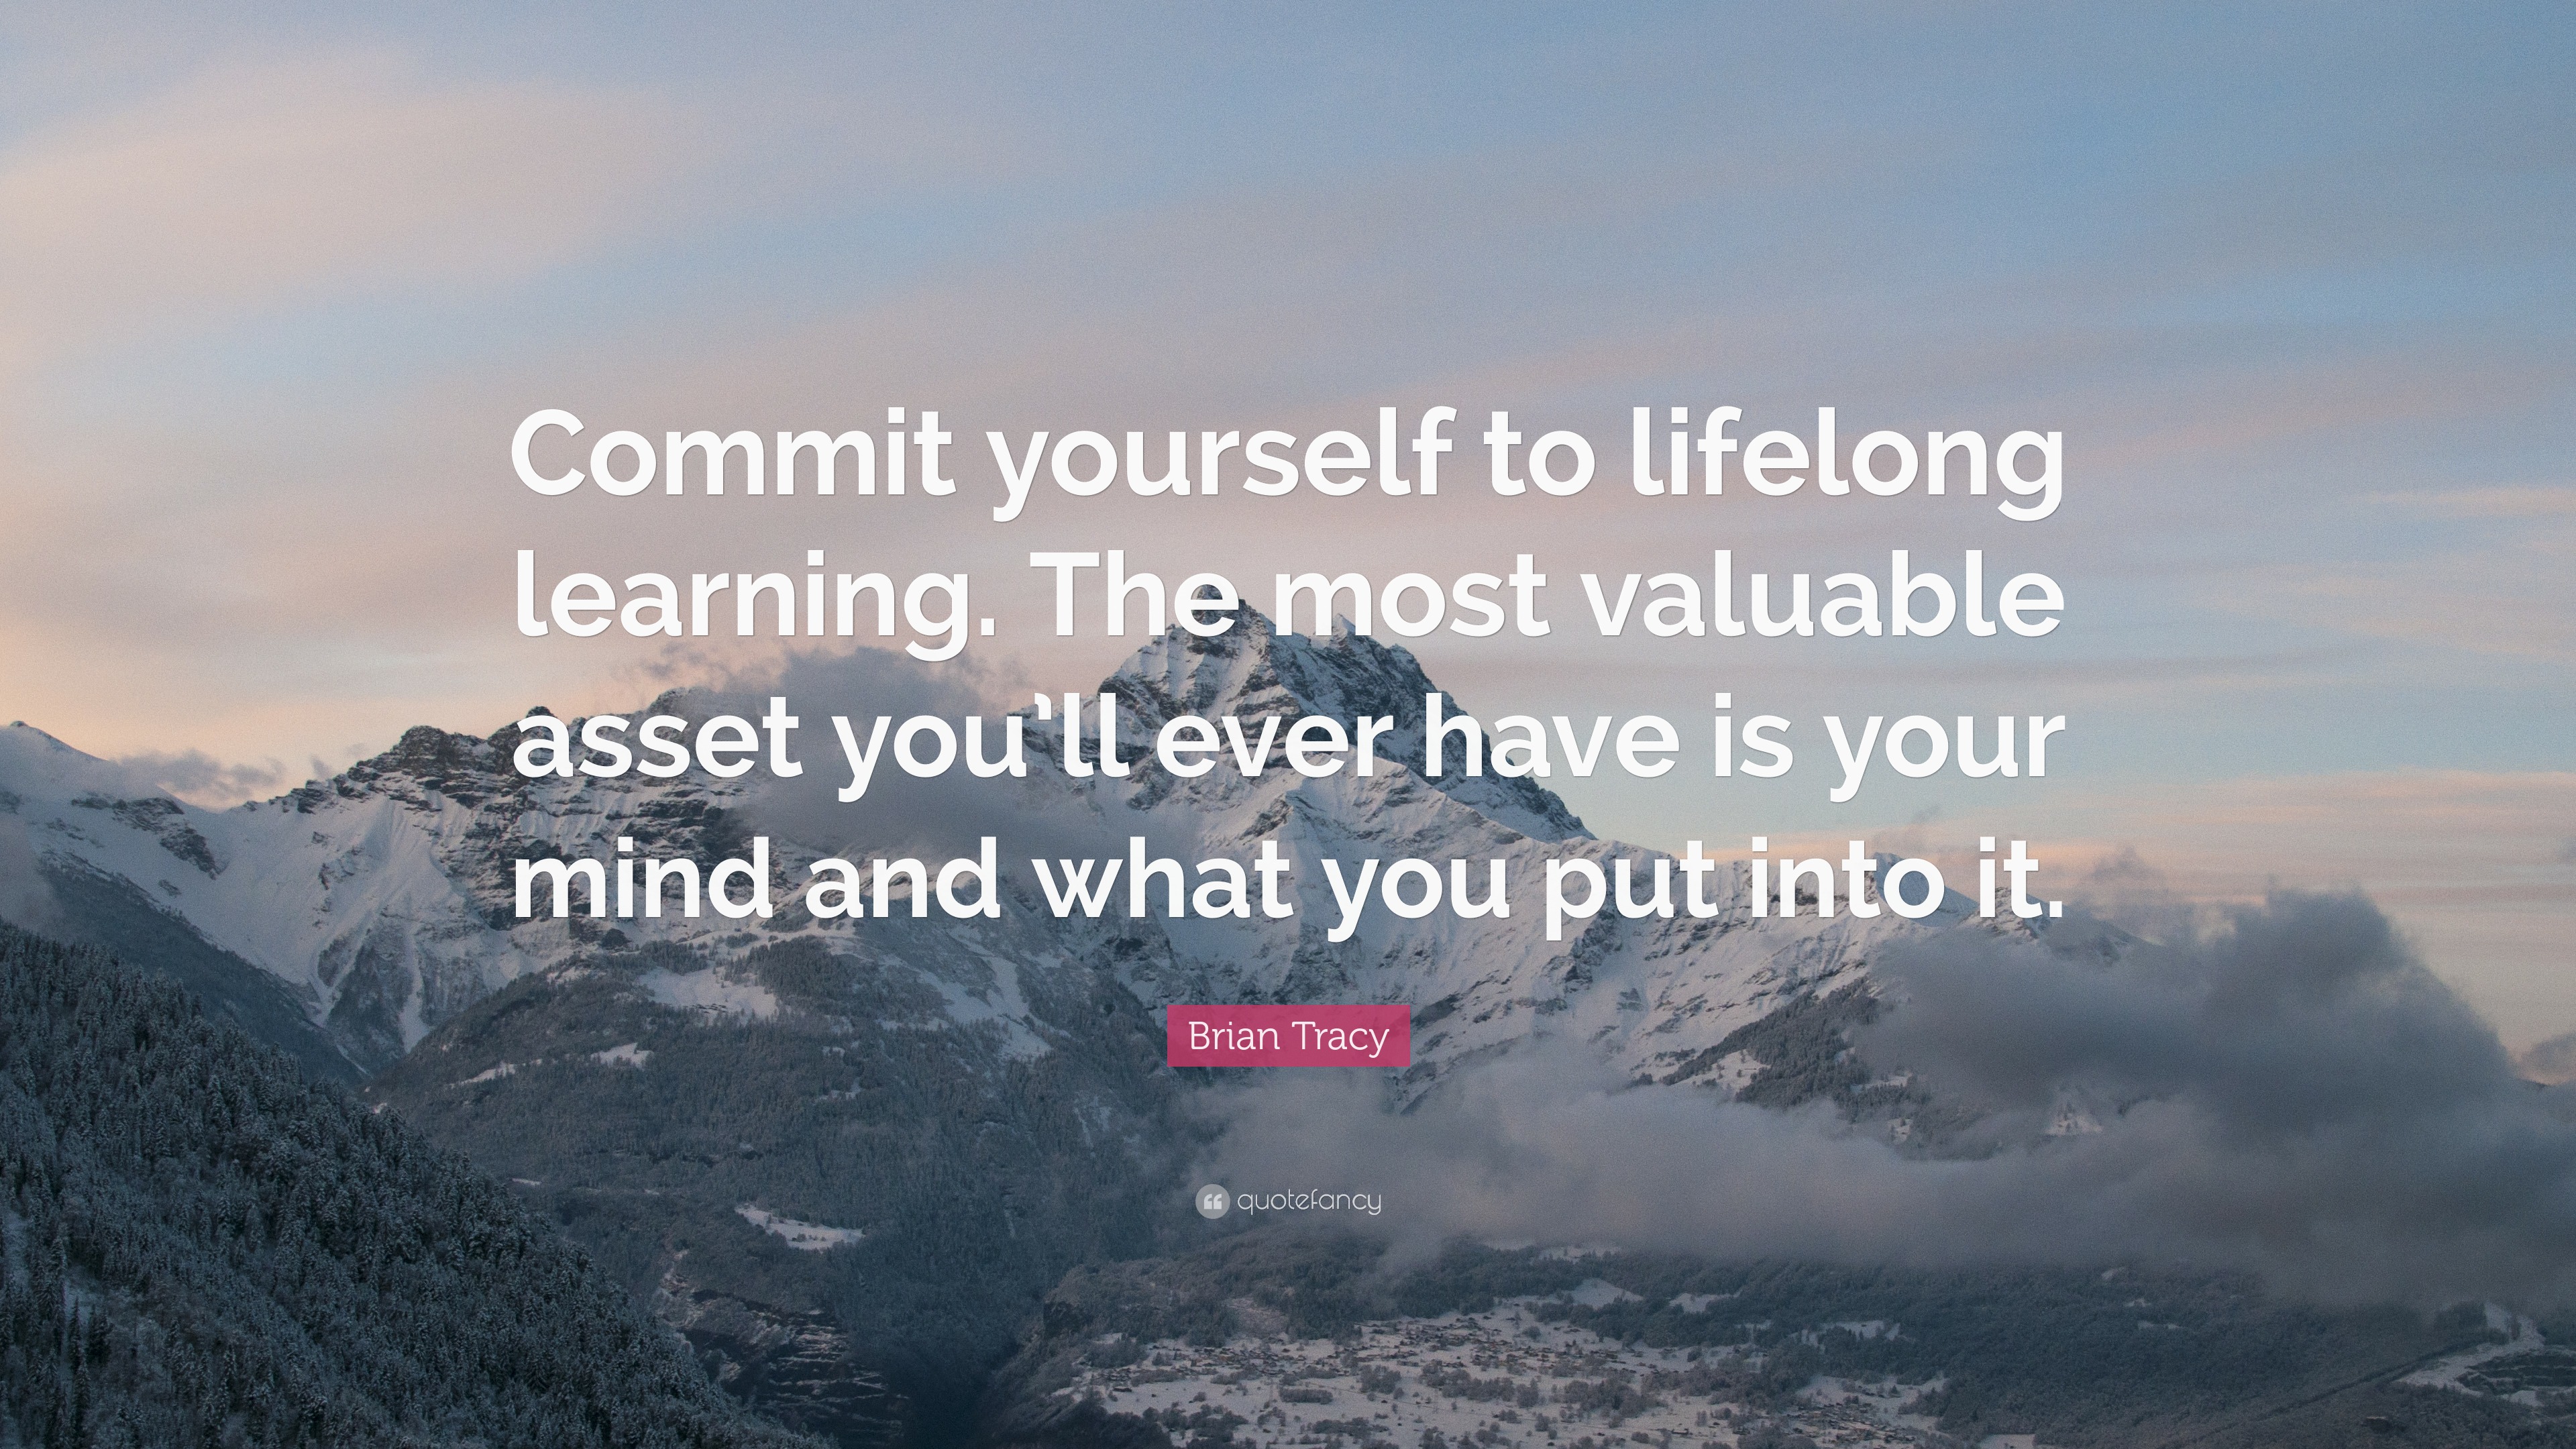 Brian Tracy Quote: “Commit yourself to lifelong learning. The most ...